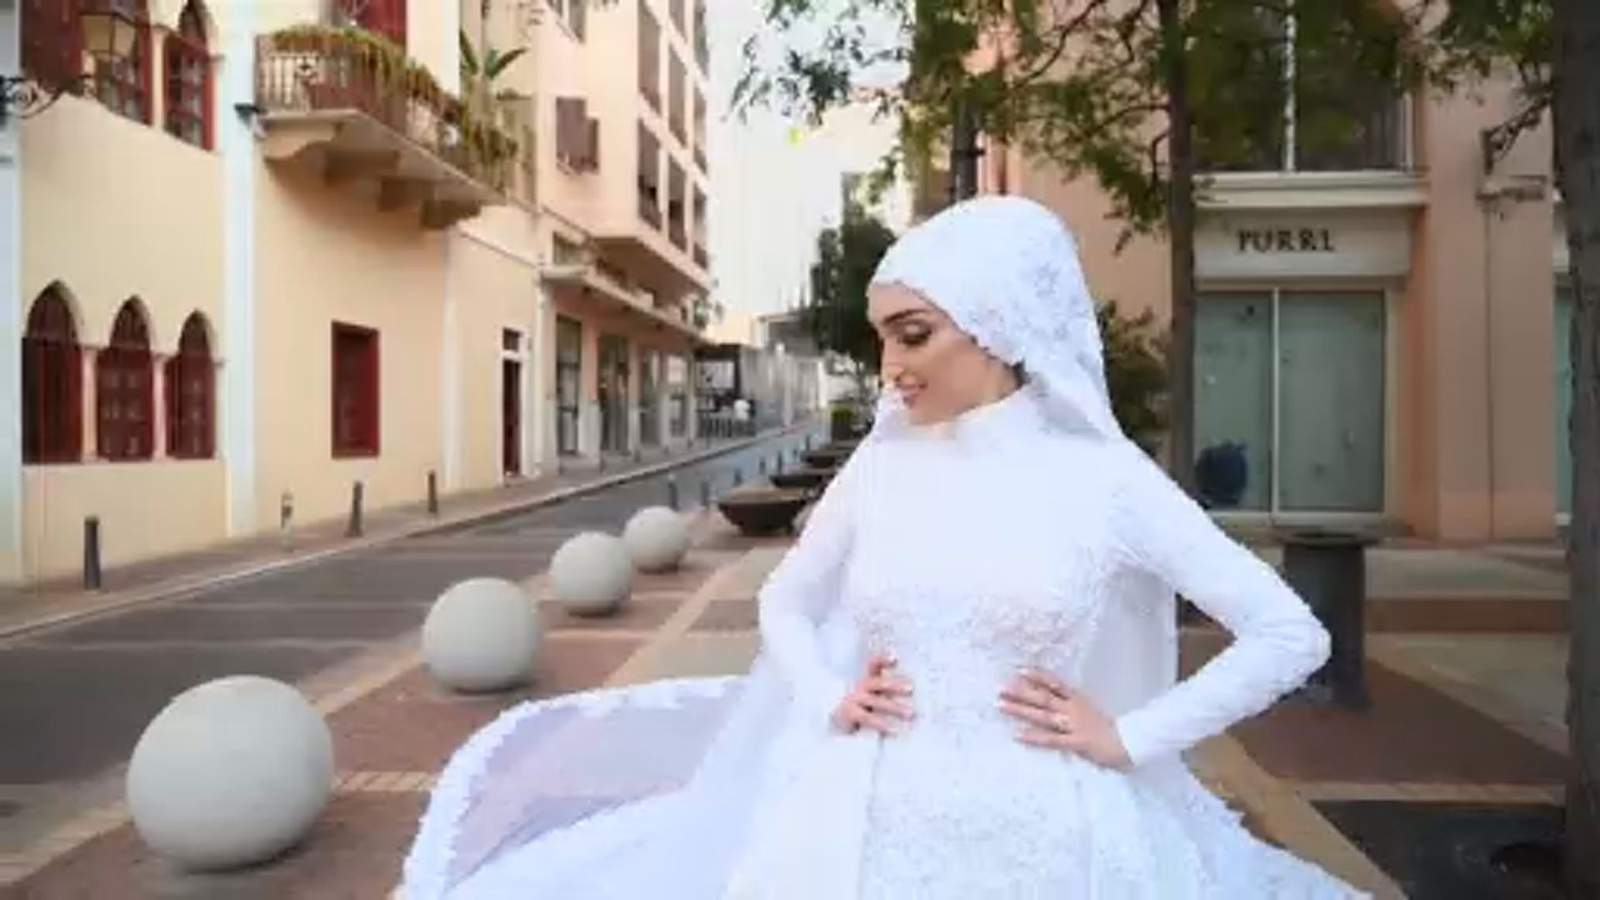 INSANE: Video shows a woman in the middle of a bridal photoshoot get knocked down in Beirut explosion